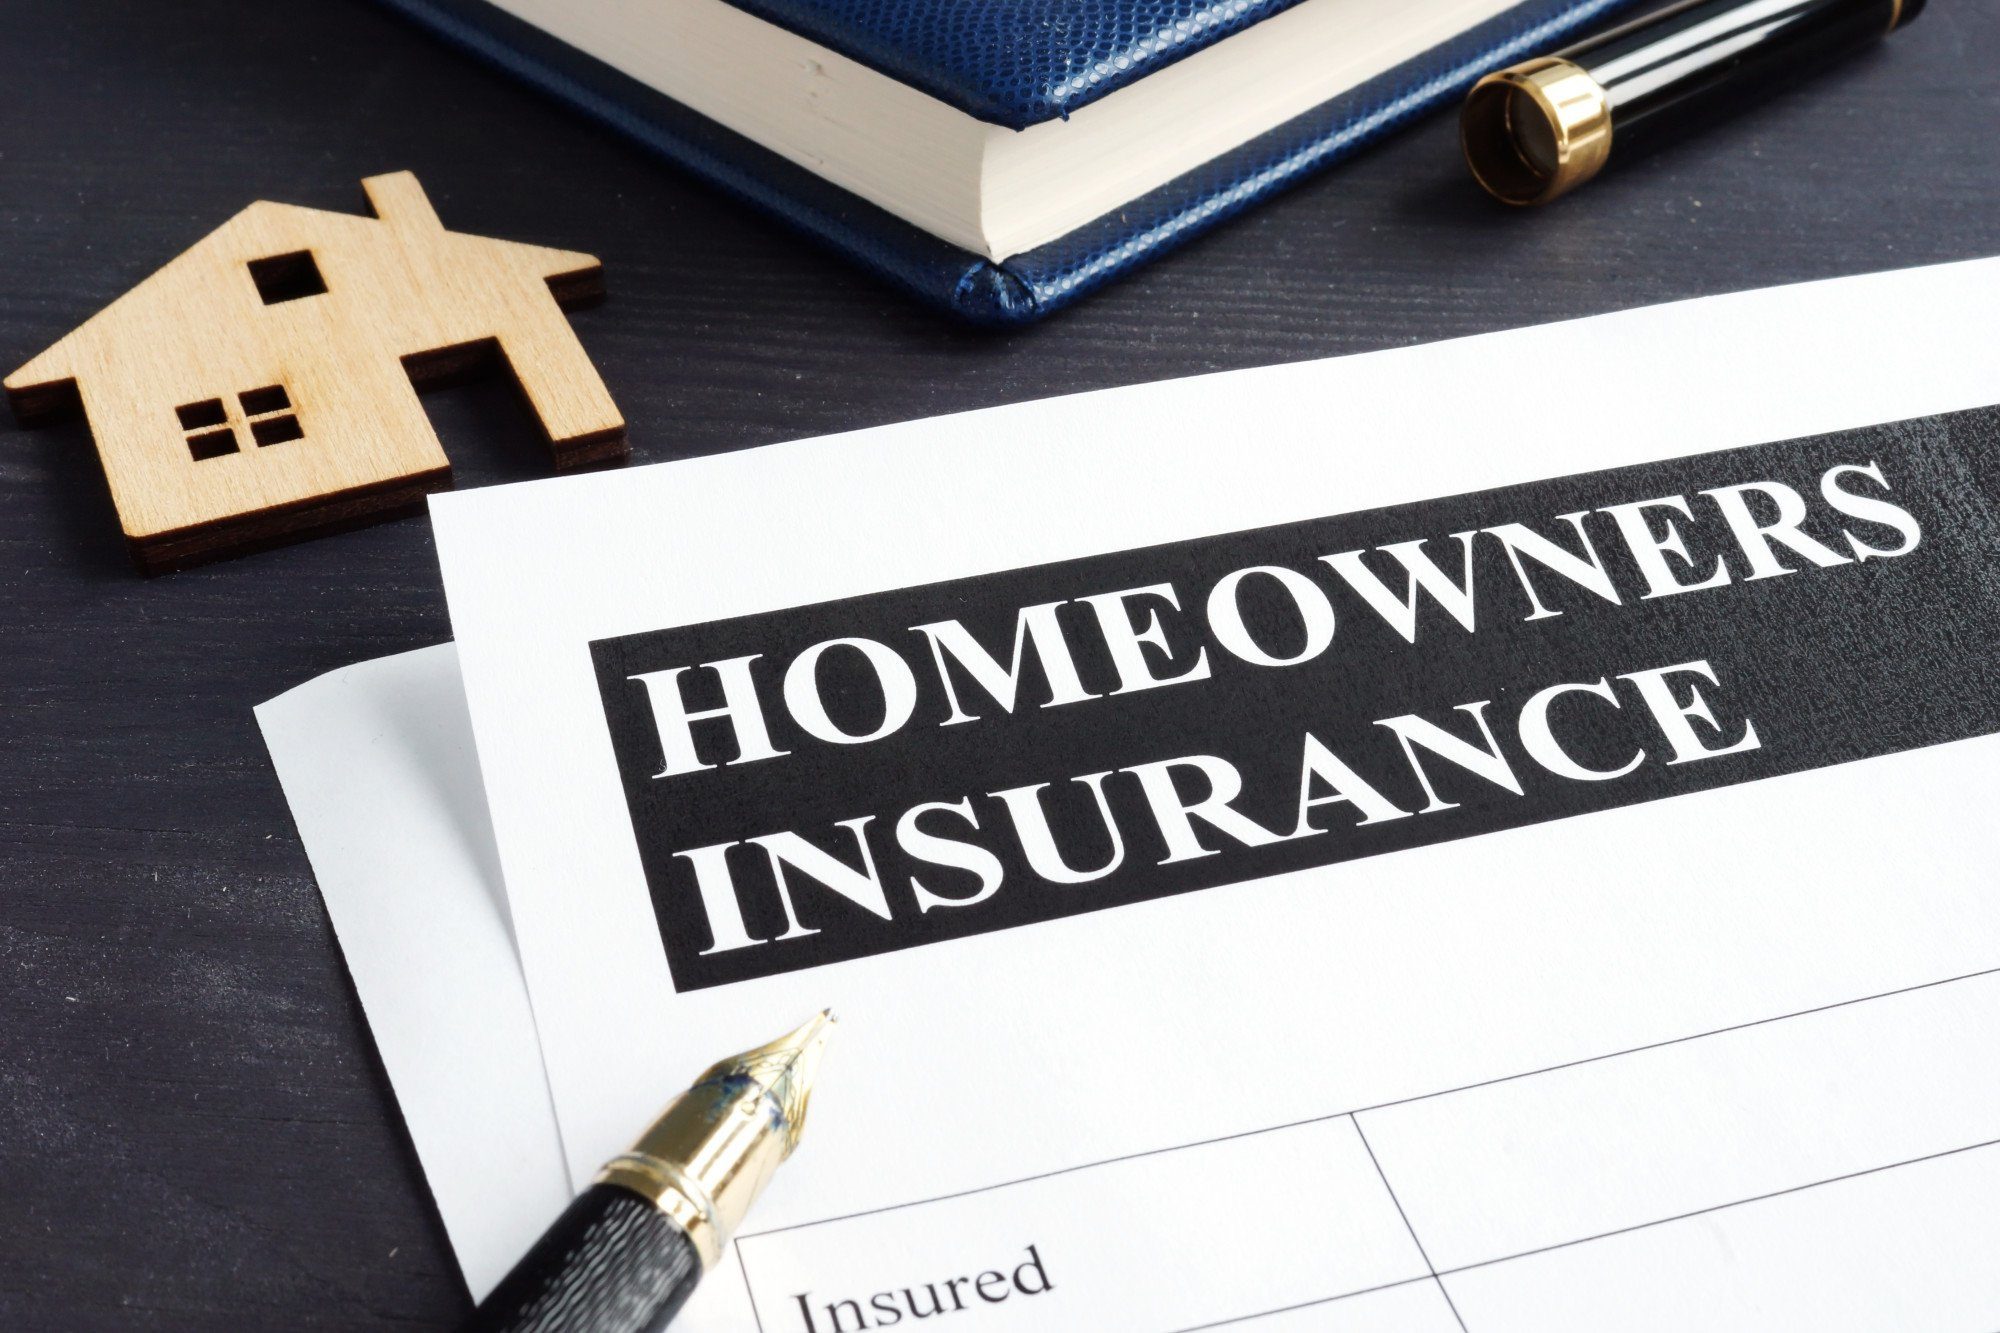 Does home insurance cover structural damage